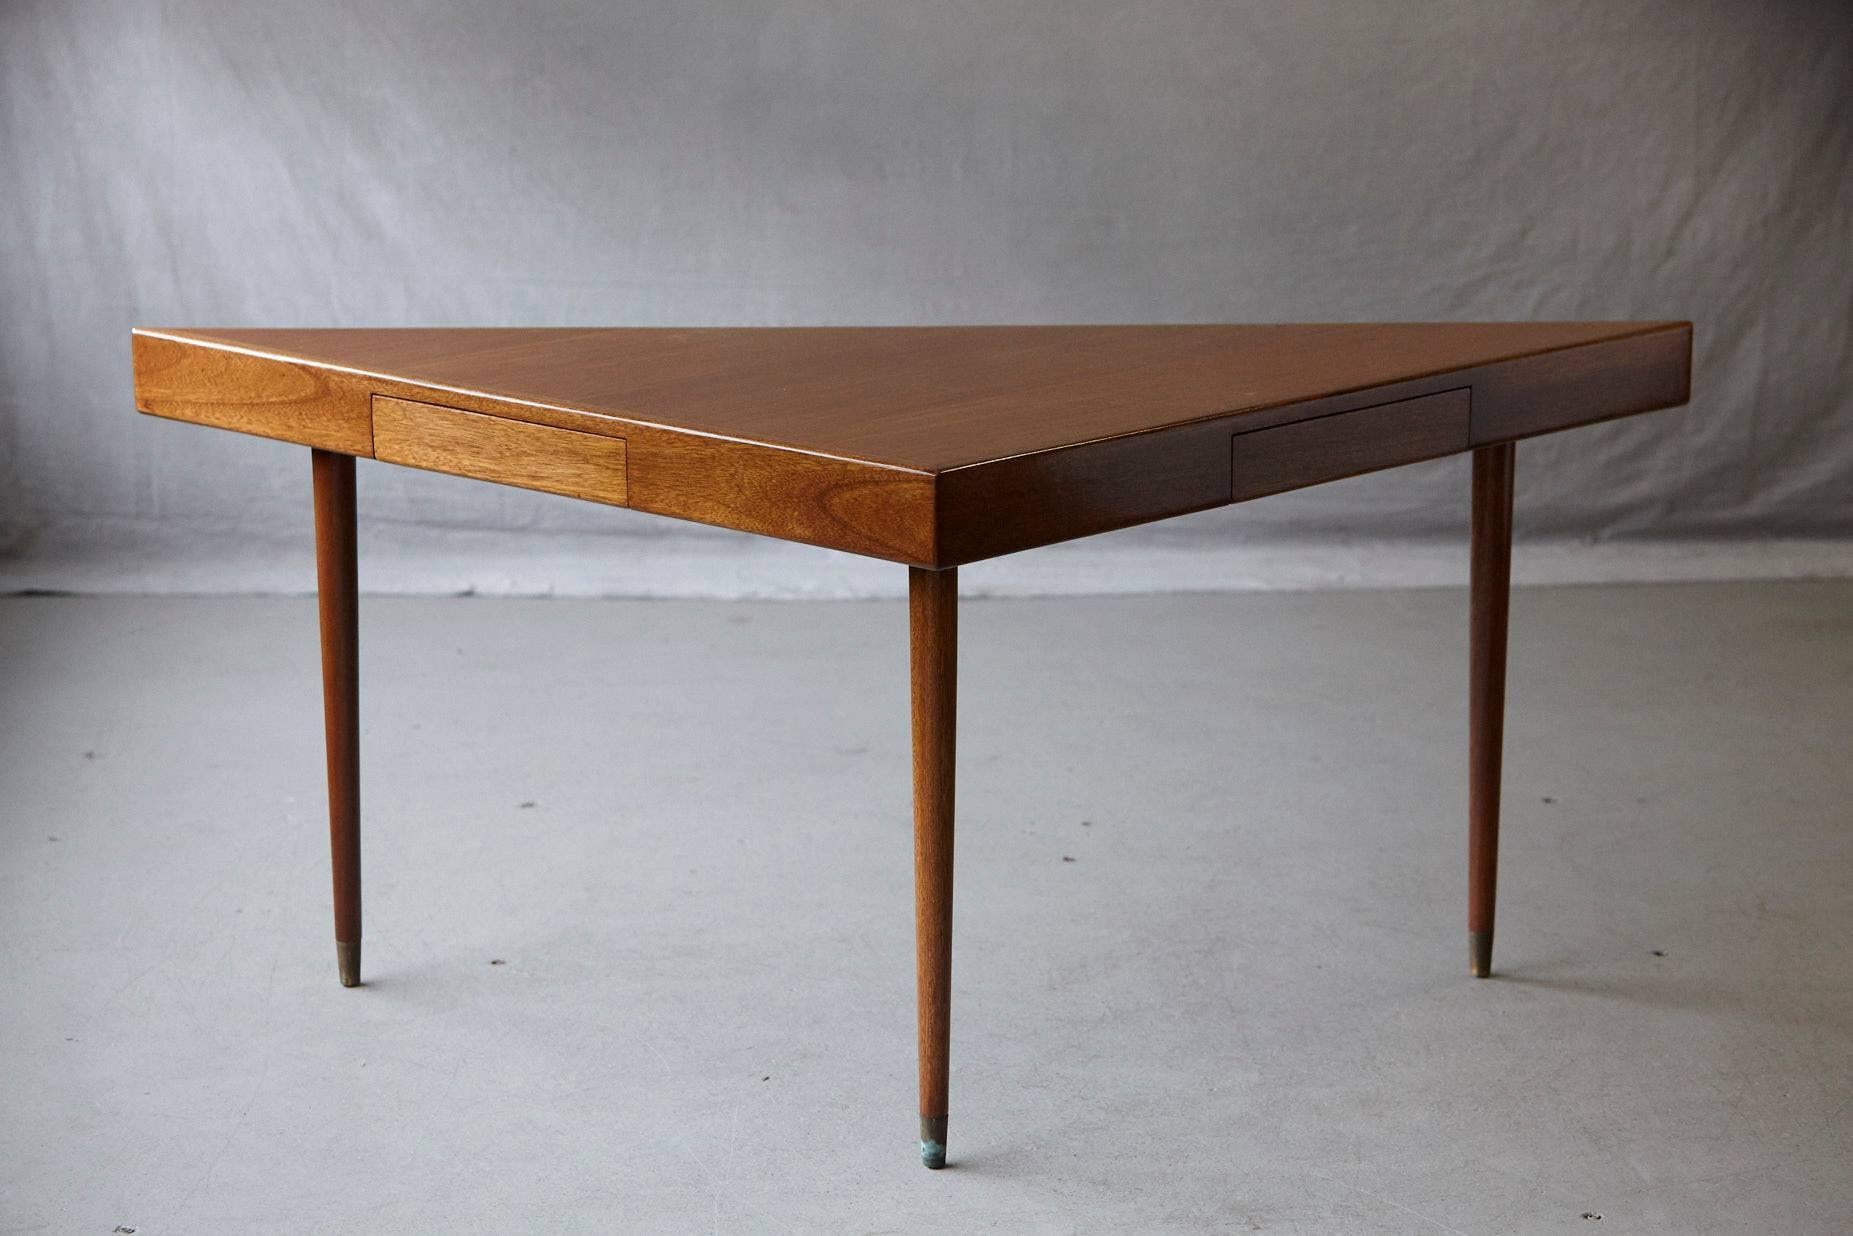 Beautiful, newly refinished, bleached mahogany triangular table by Harvey Probber. 
Immaculate top with two drawers based on slightly tapered legs with unpolished brass sabots (can be polished if wished). Designer's label in the drawer.